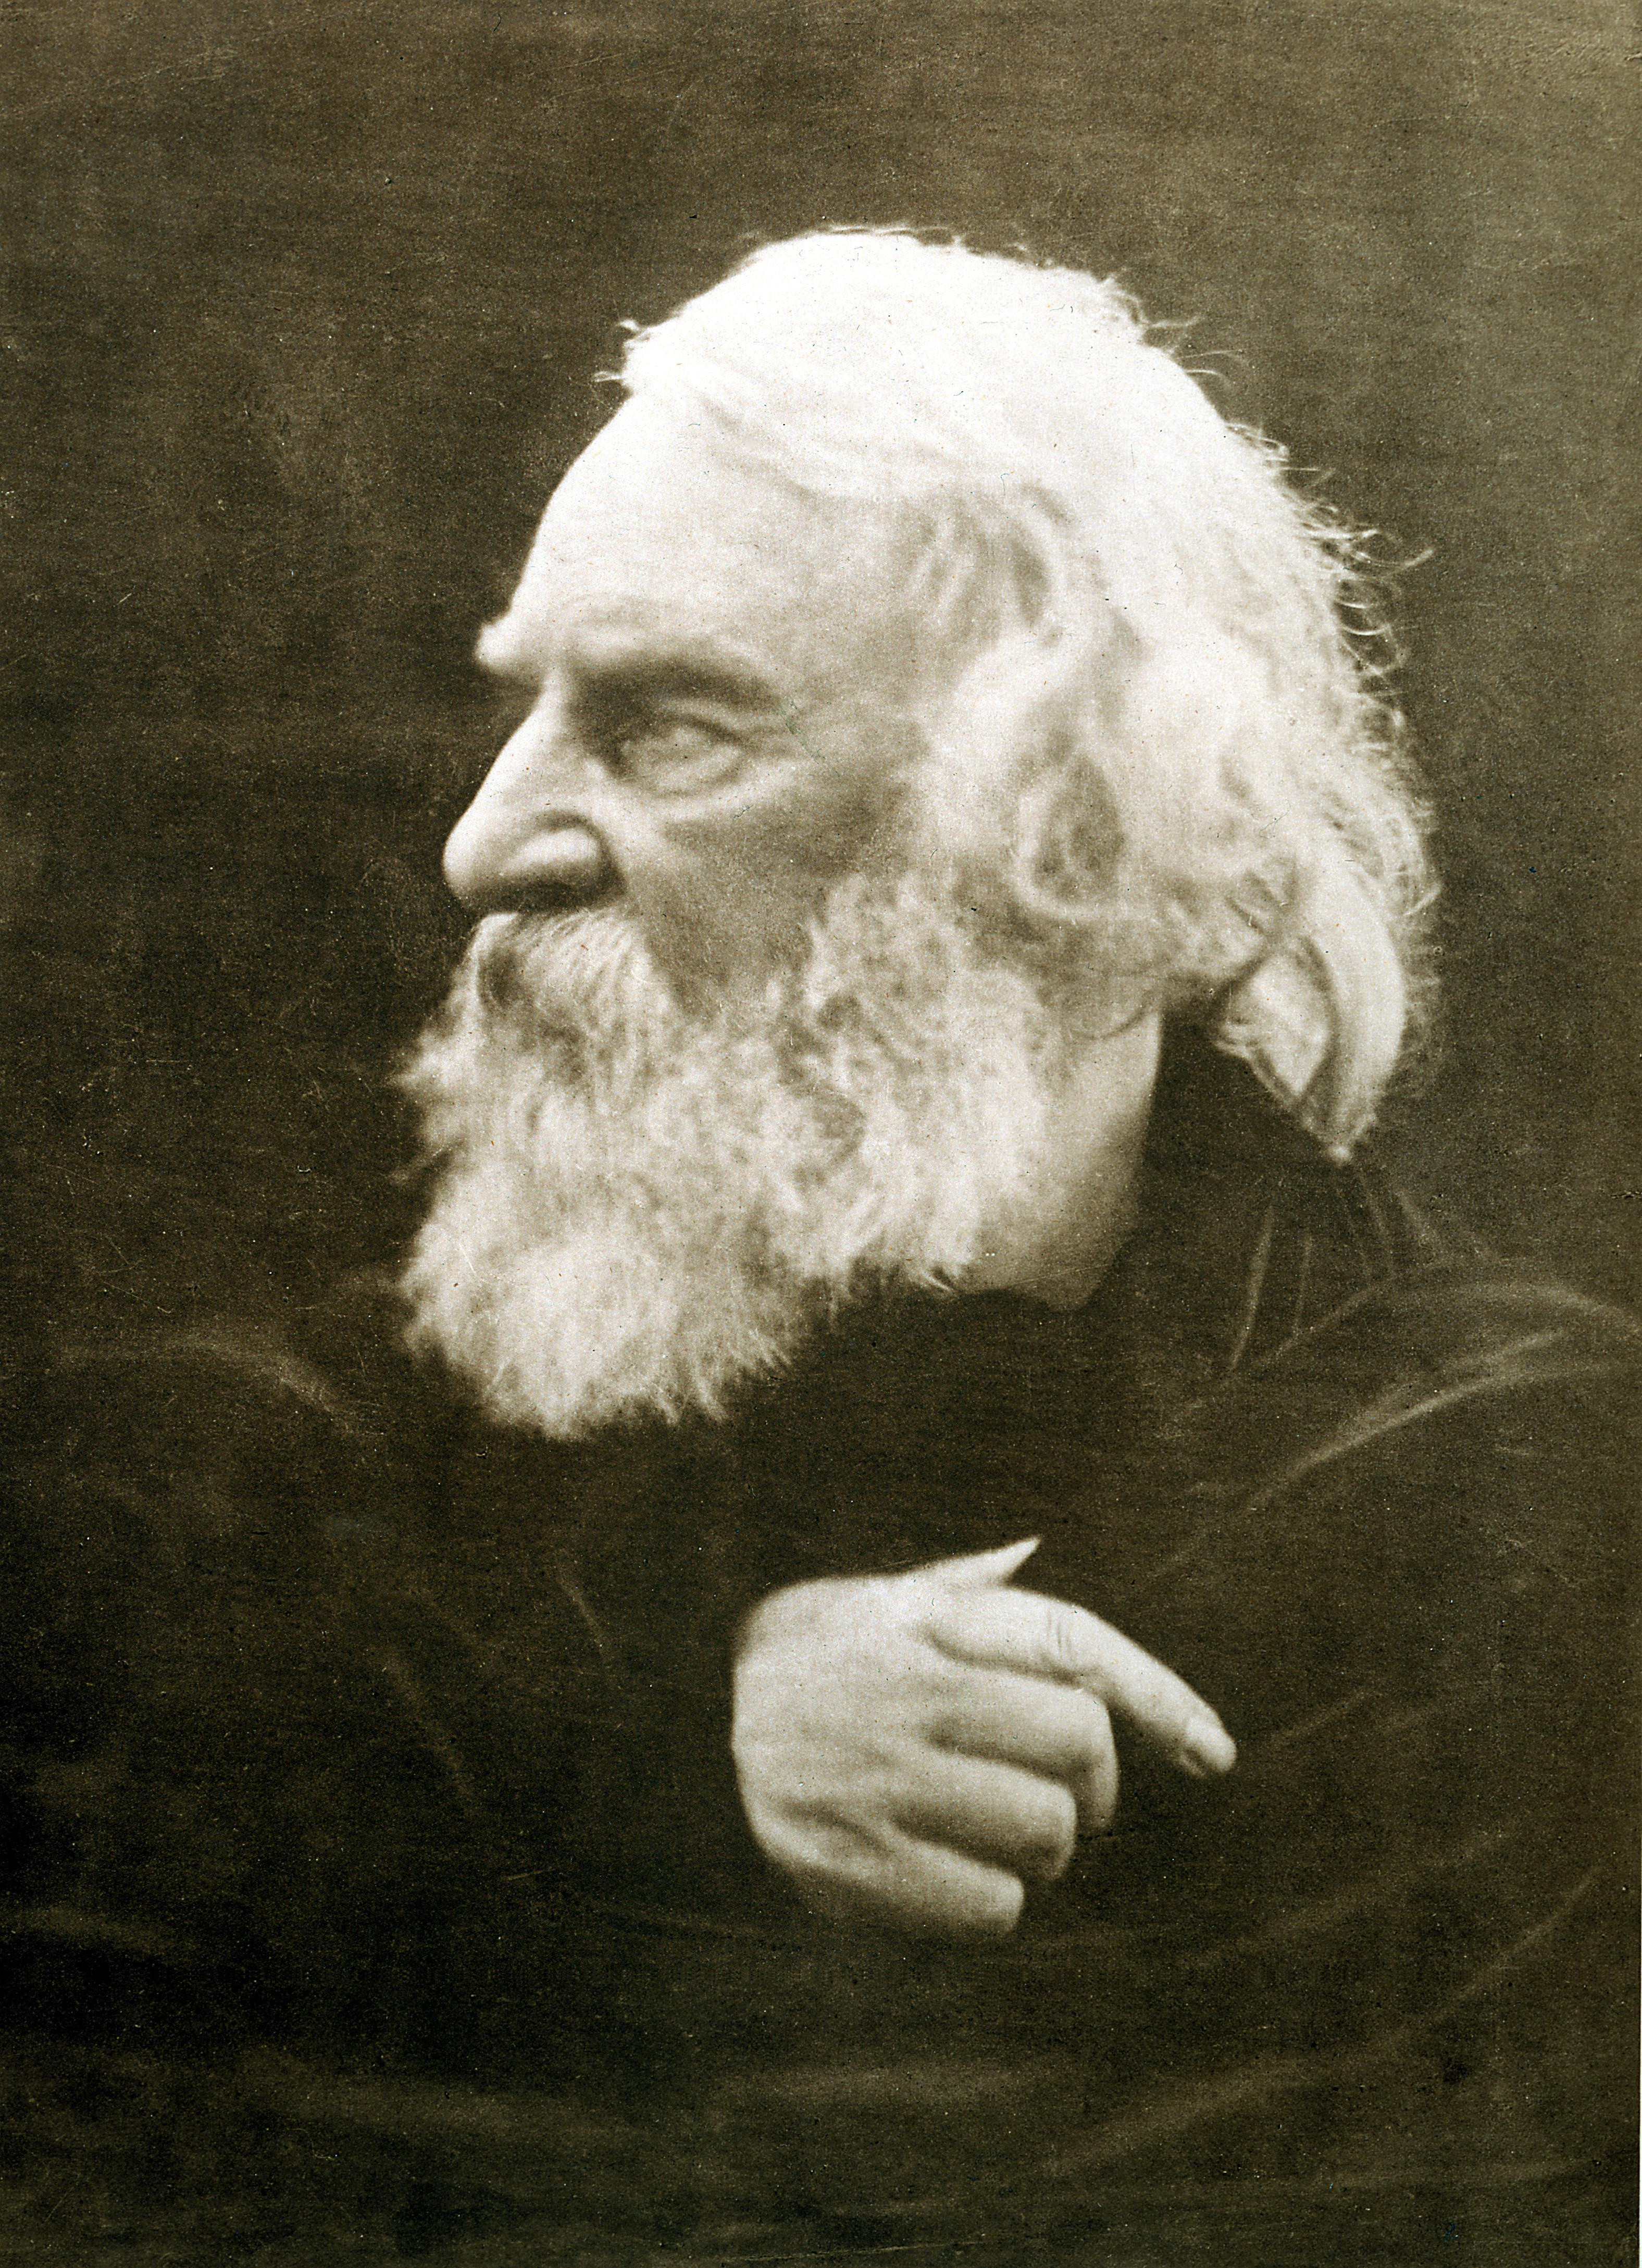 Top Famous Poems: “Paul Revere’s Ride” by Henry Wadsworth Longfellow